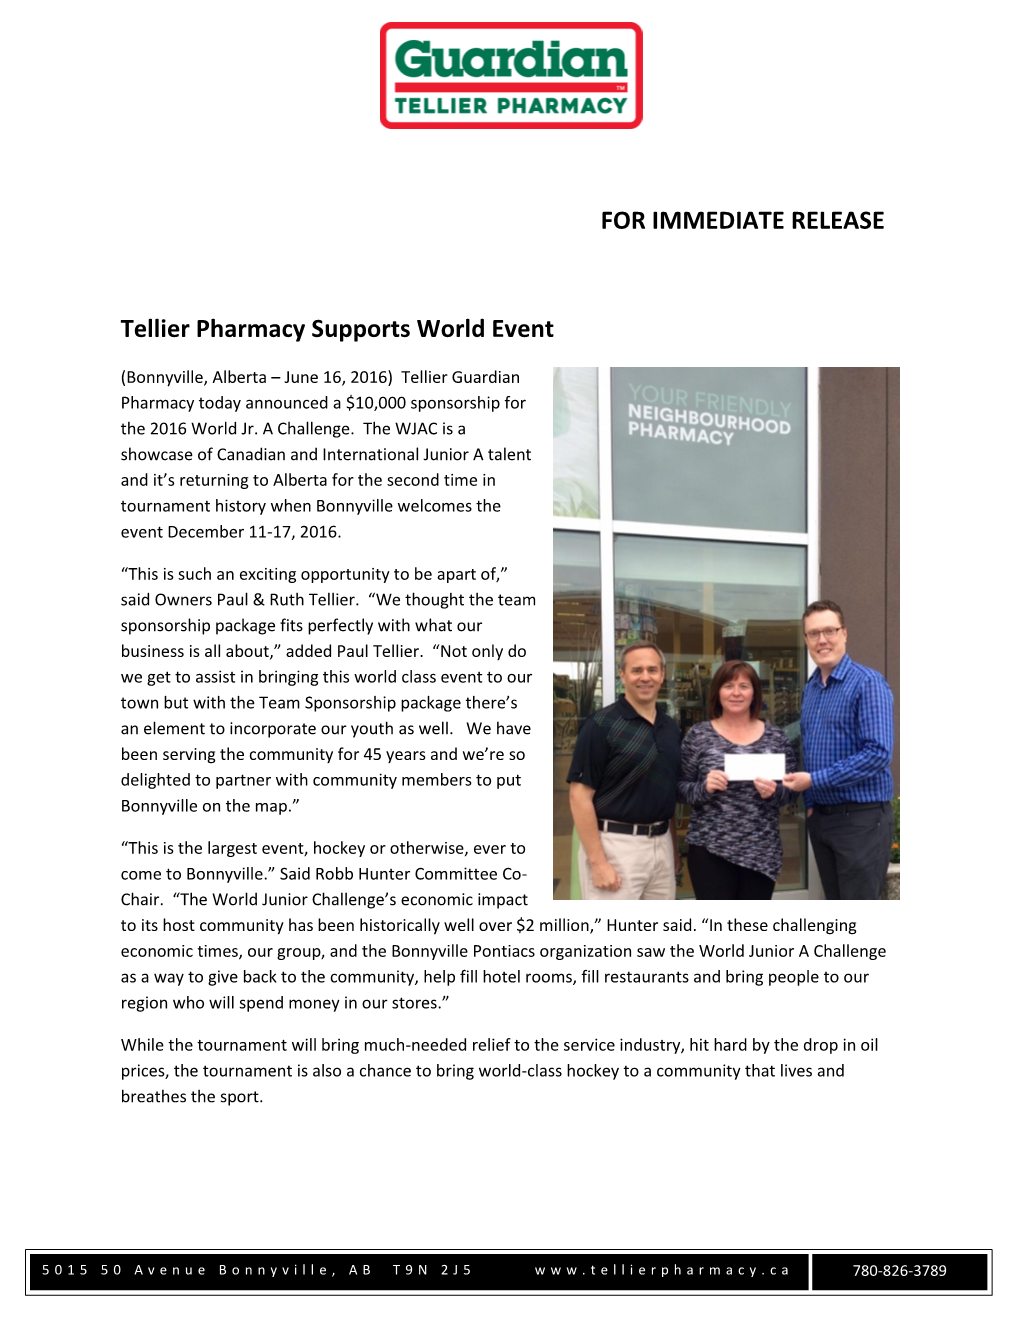 FOR IMMEDIATE RELEASE Tellier Pharmacy Supports World Event